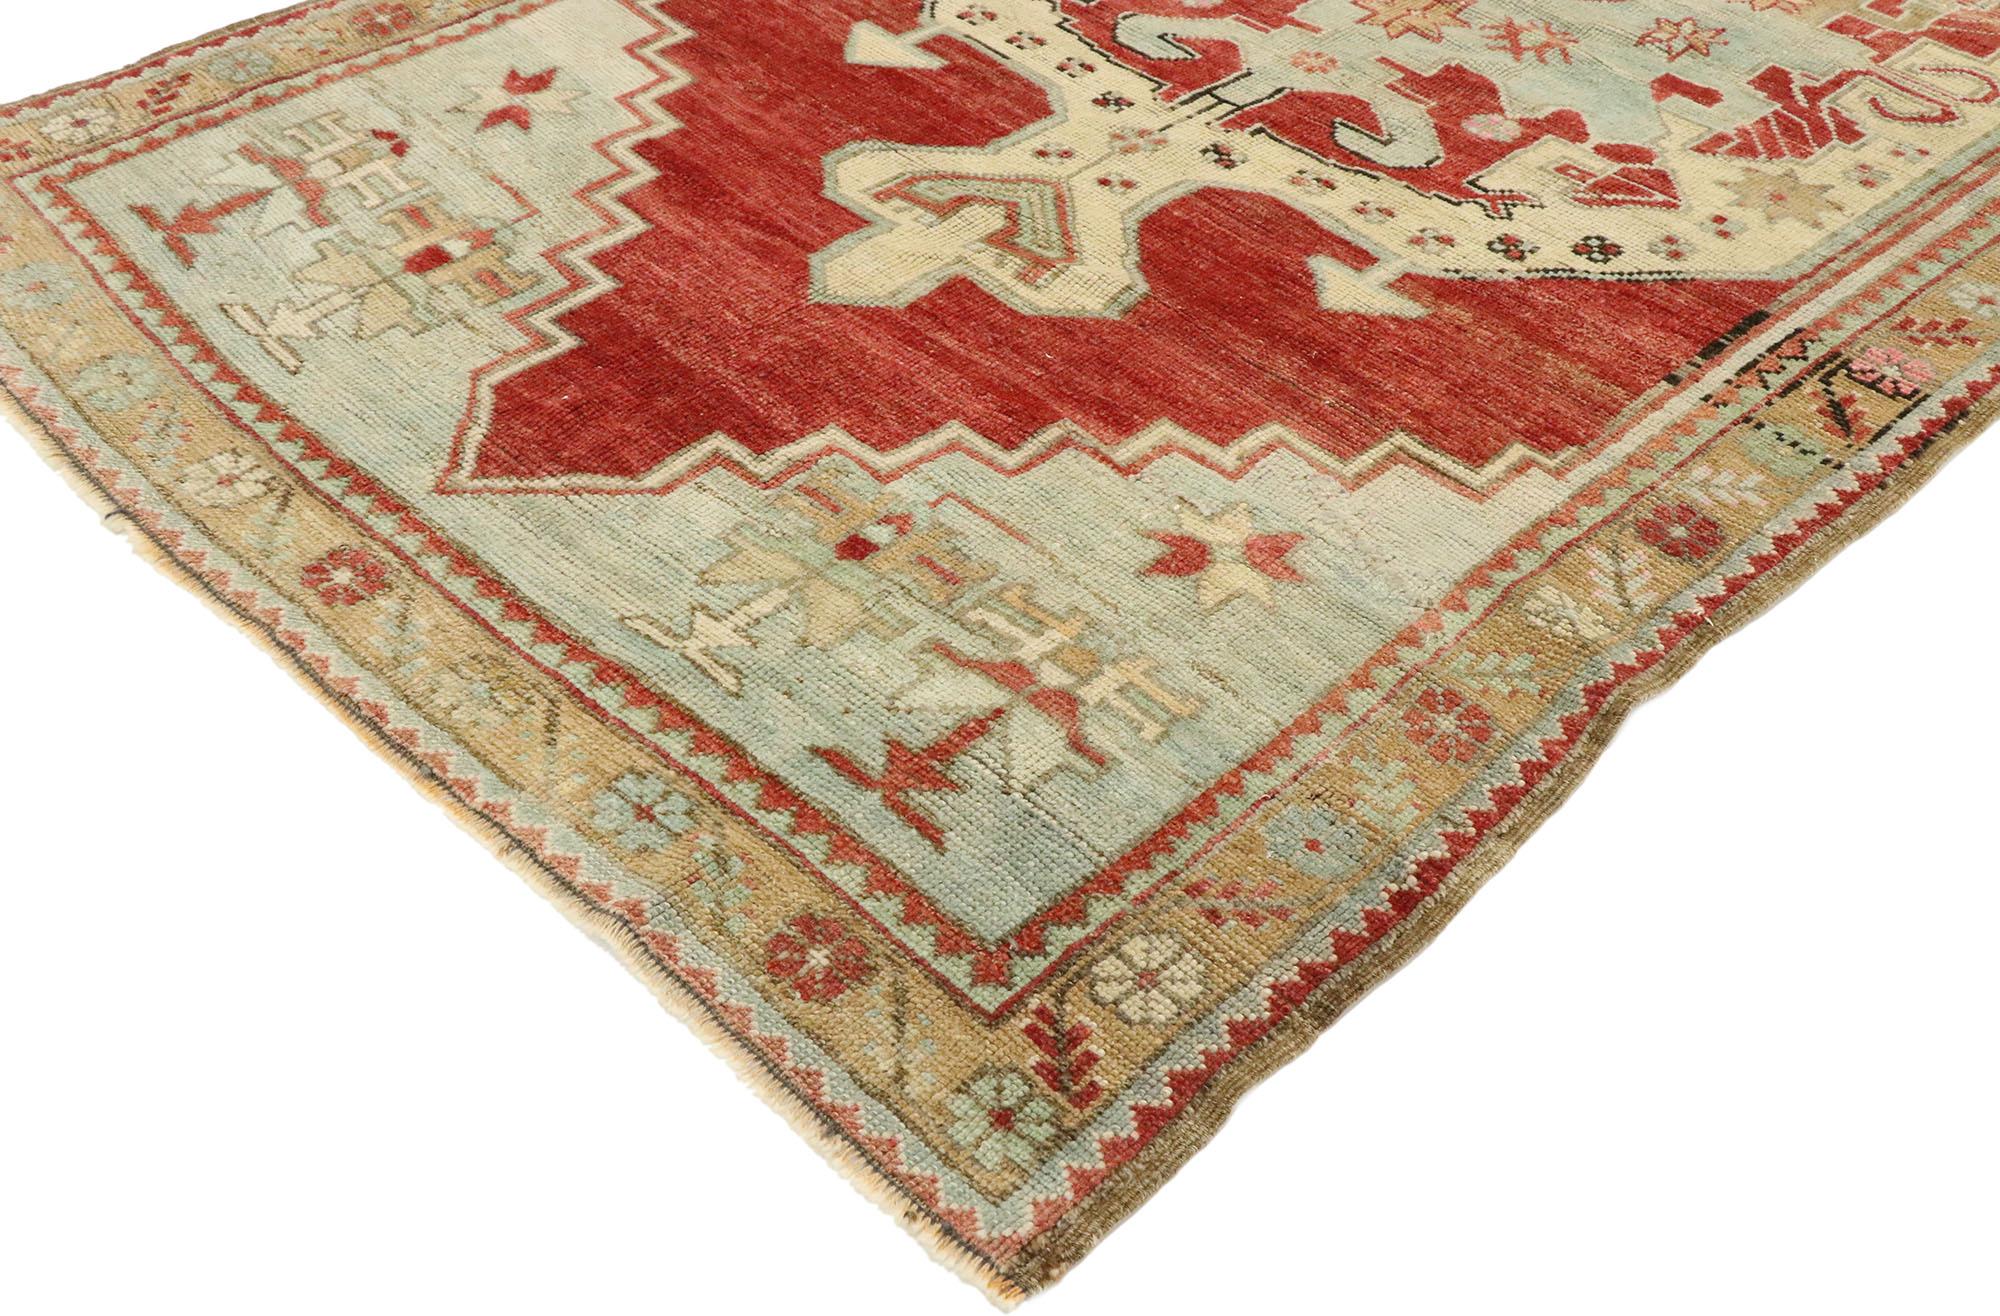 53081, vintage Turkish Oushak rug with New England Cape Cod style. With timeless design and defining colors, evoke the charming New England Cape Cod style with this hand knotted wool vintage Turkish Oushak rug. The stepped abrashed red cut-out field